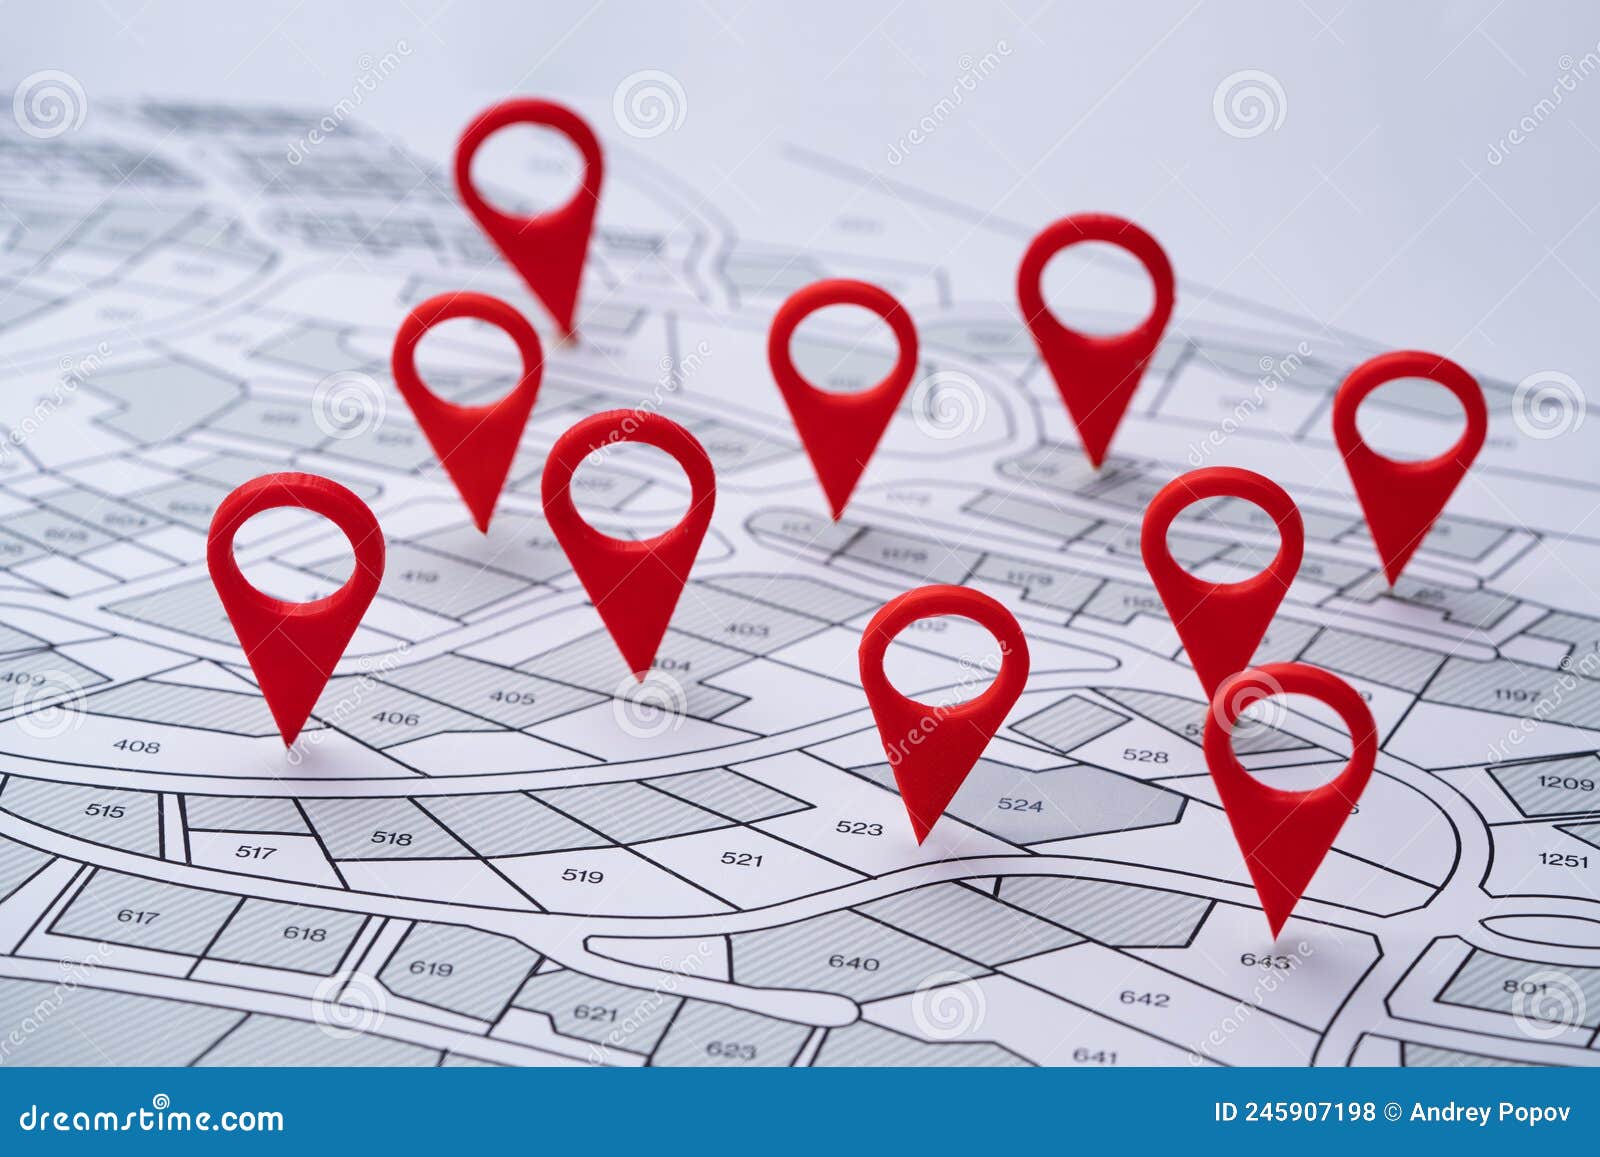 local cadastre map and location pins